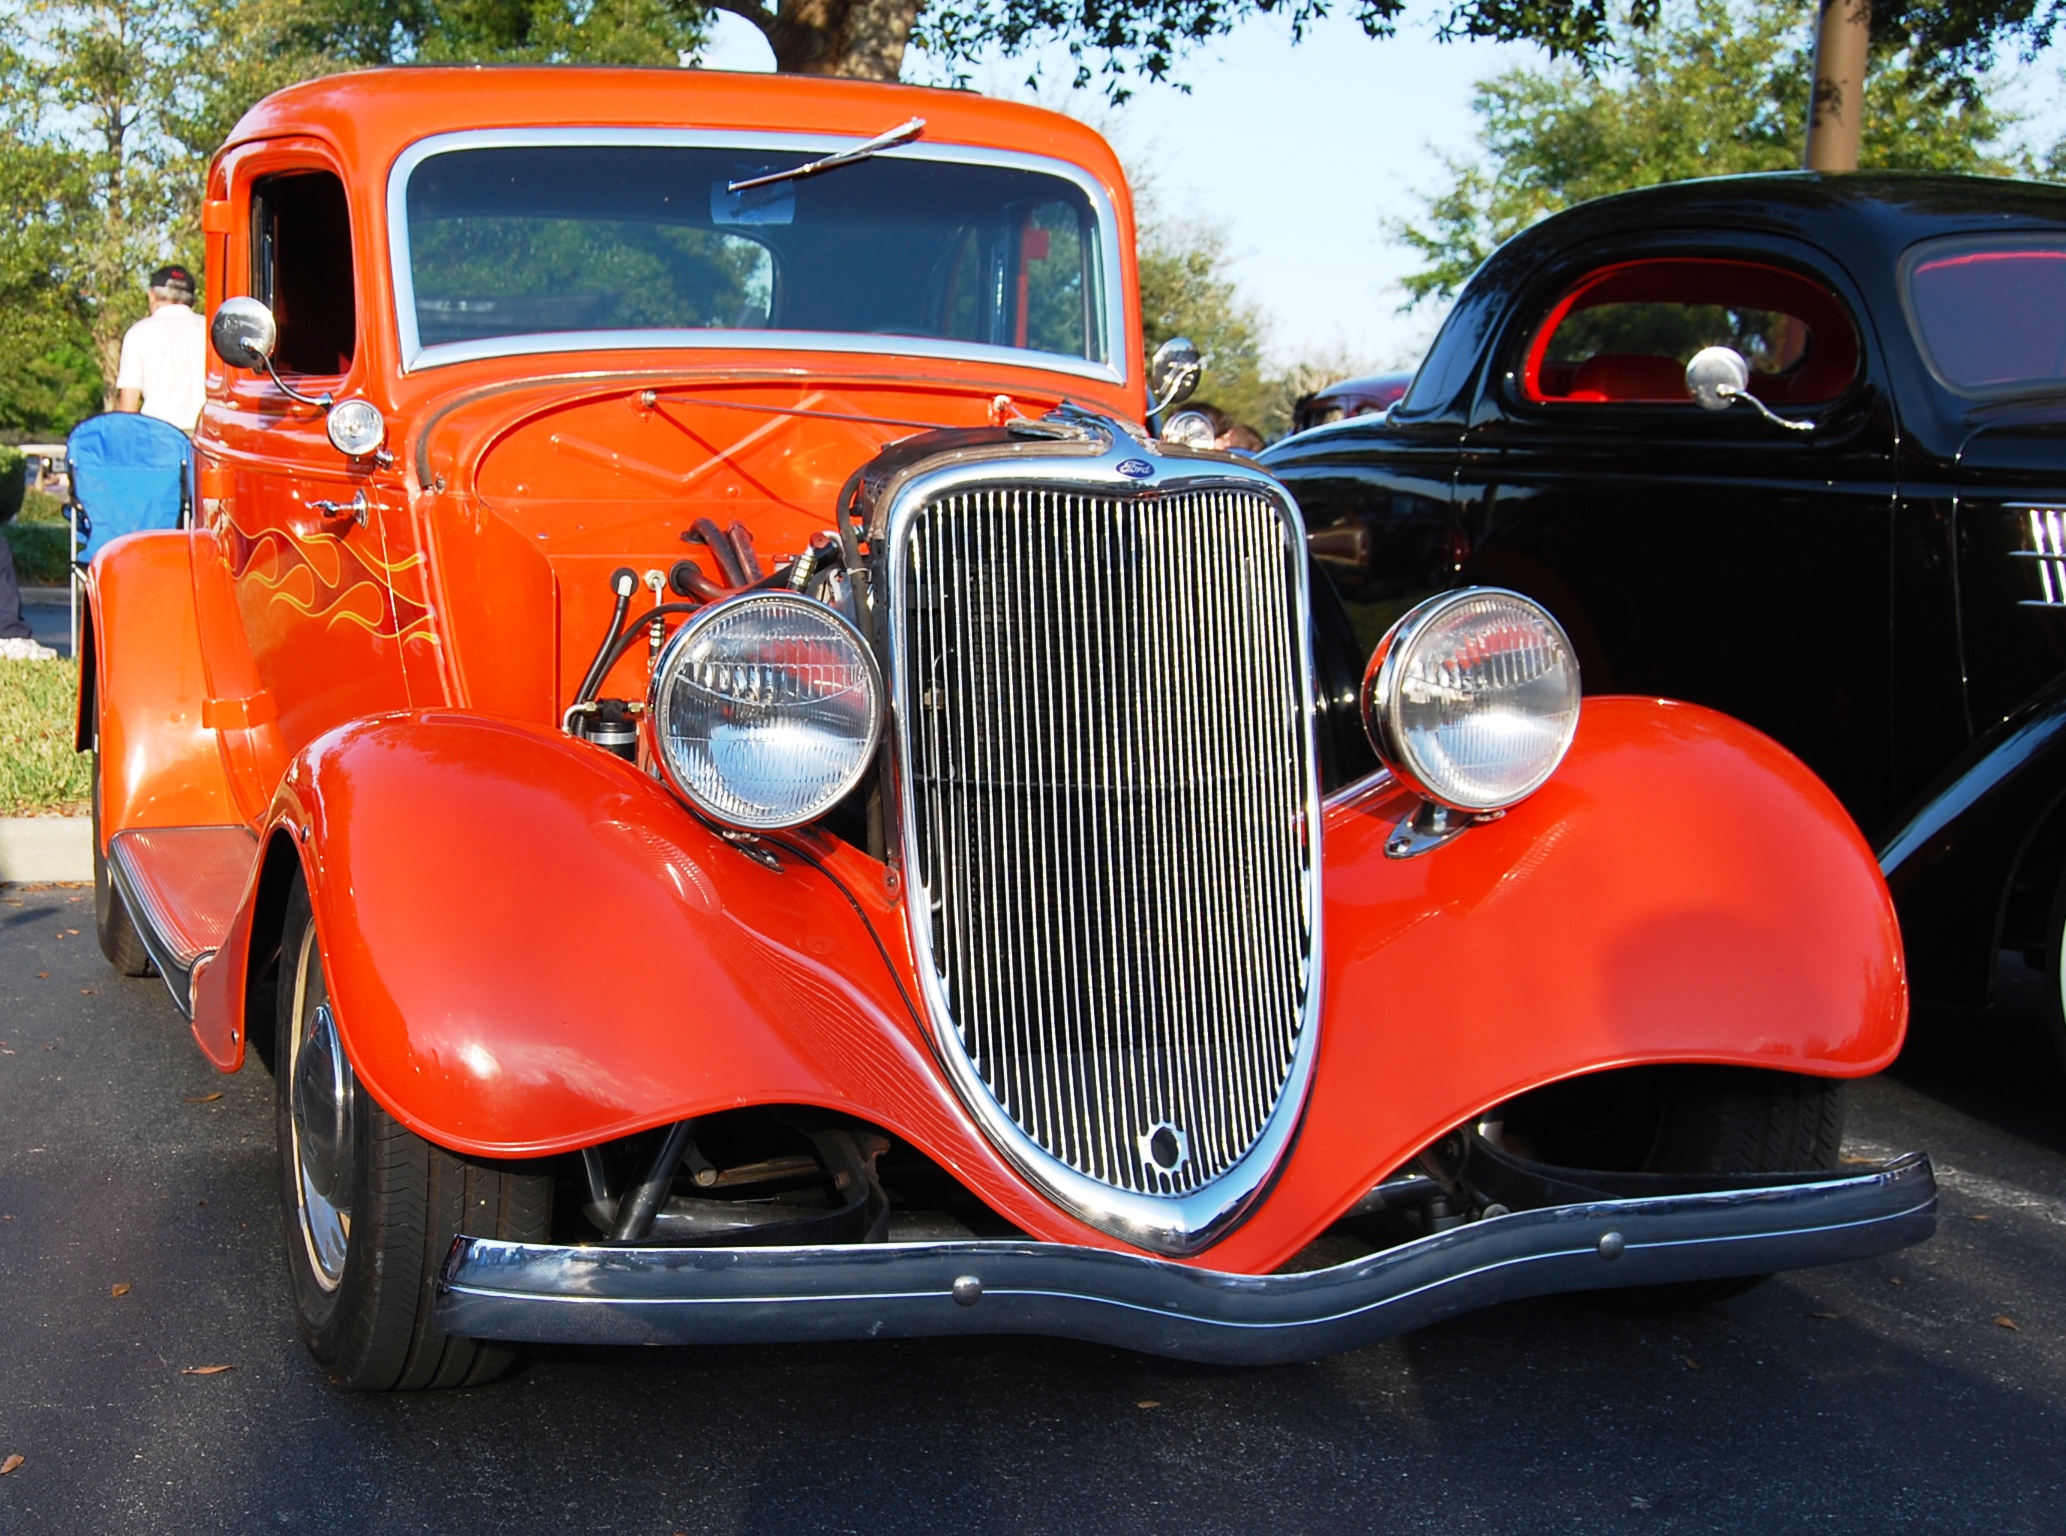 Red Hot Rod. leave a comment »